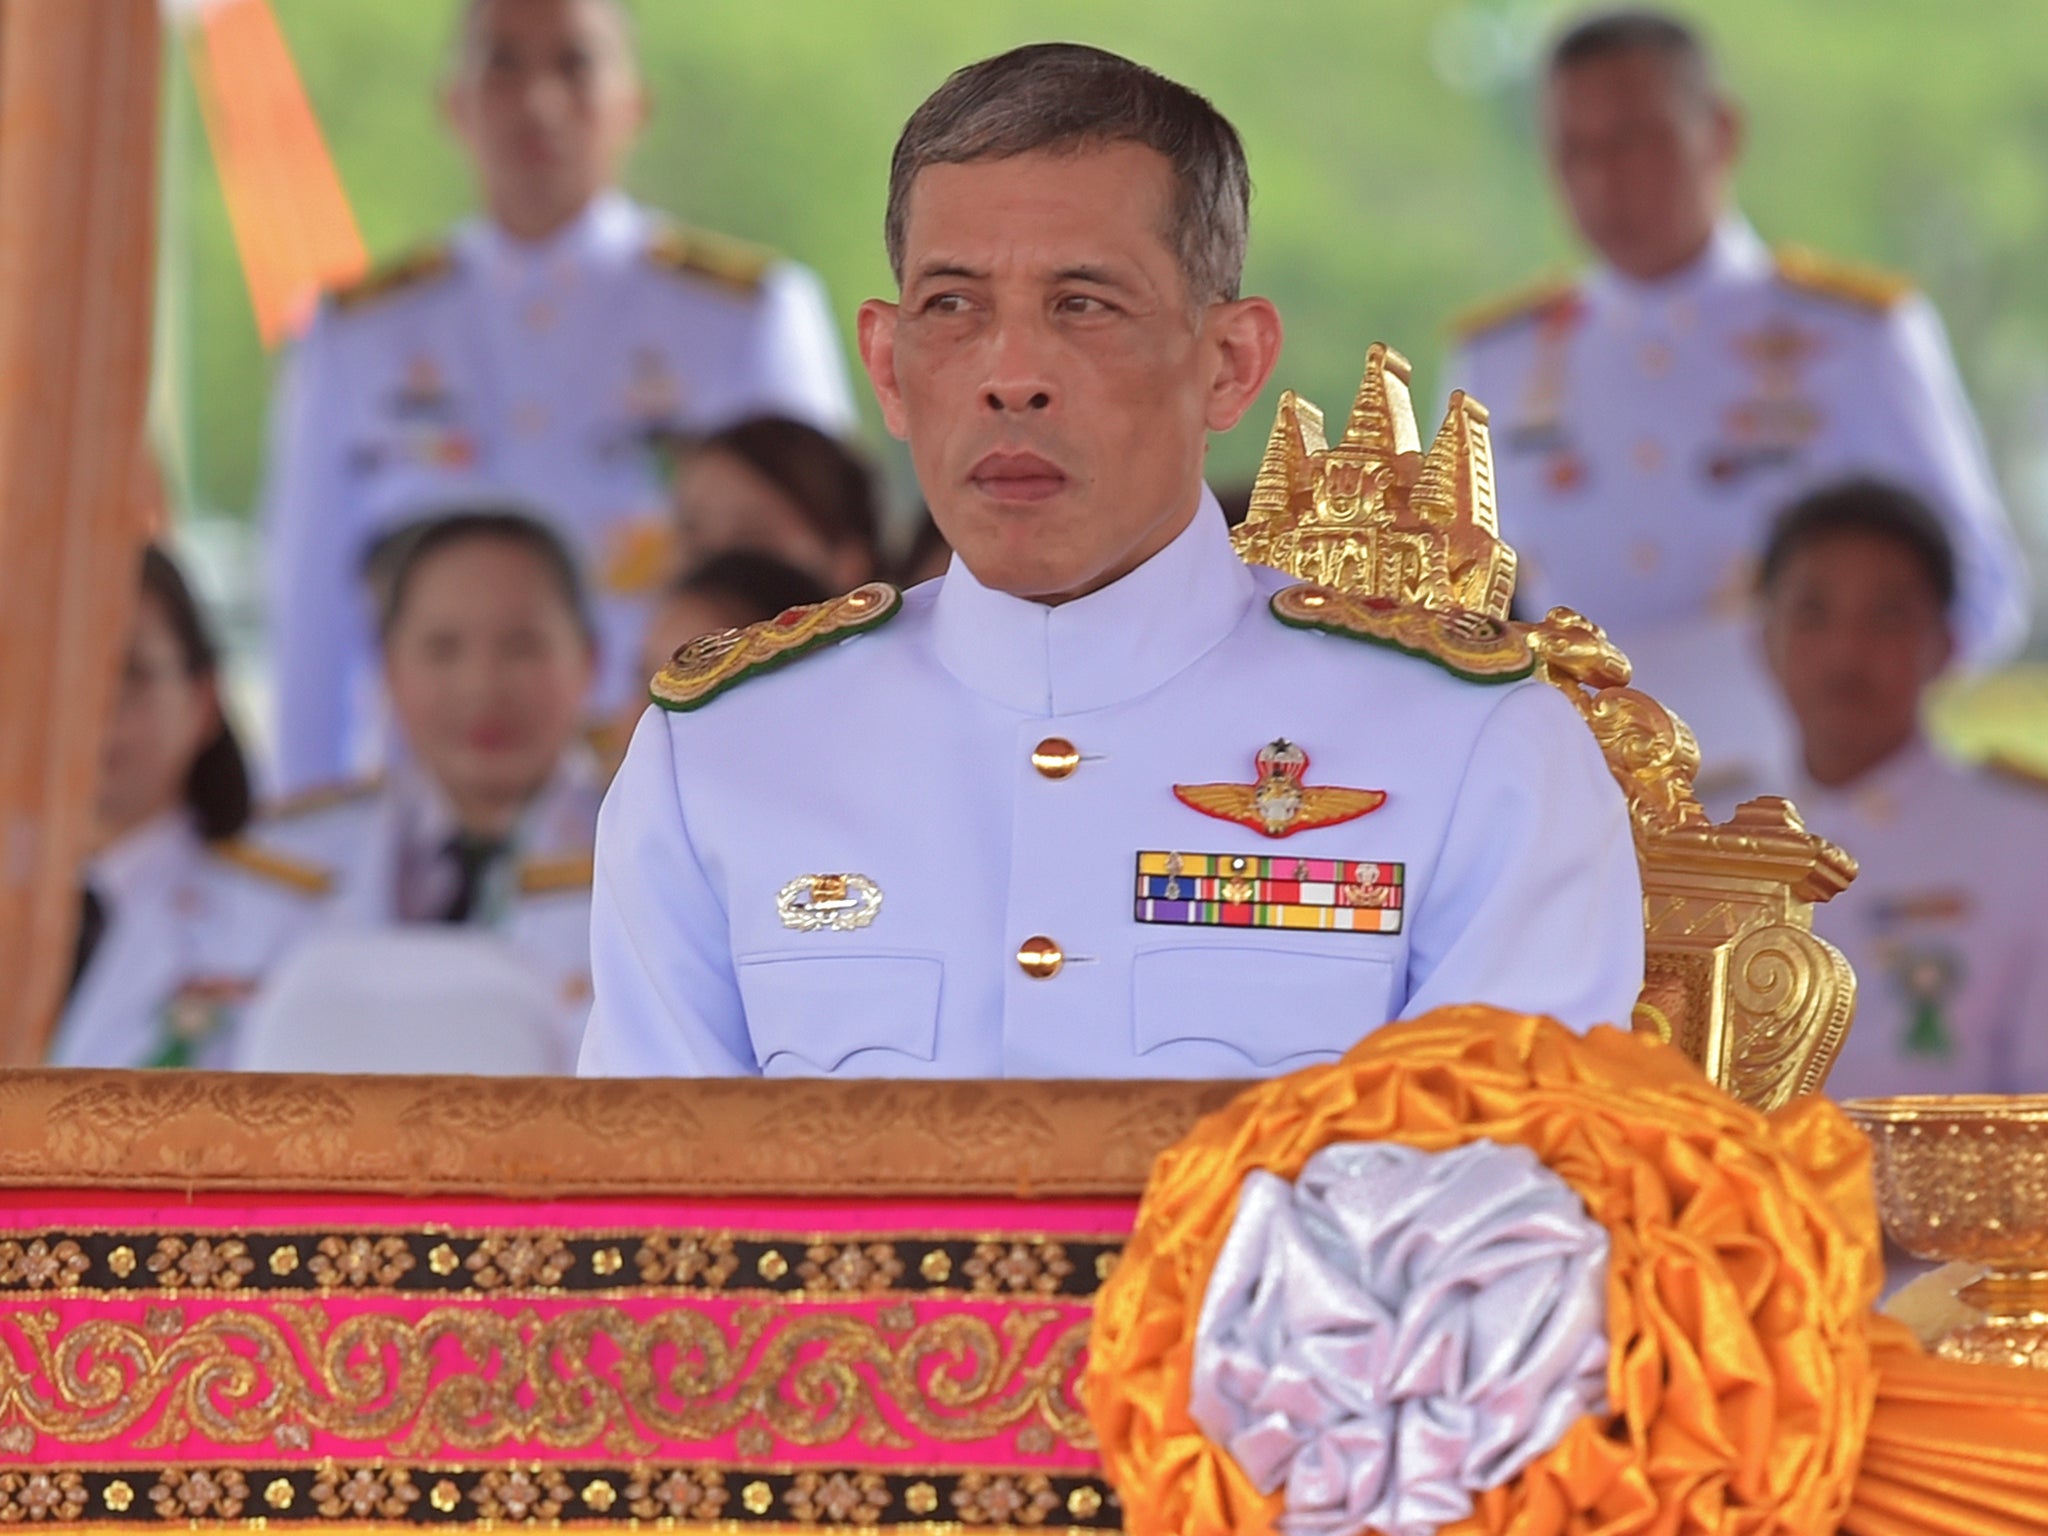 Crop-tops, mistresses and flying poodles Meet the next King of Thailand The Independent The Independent